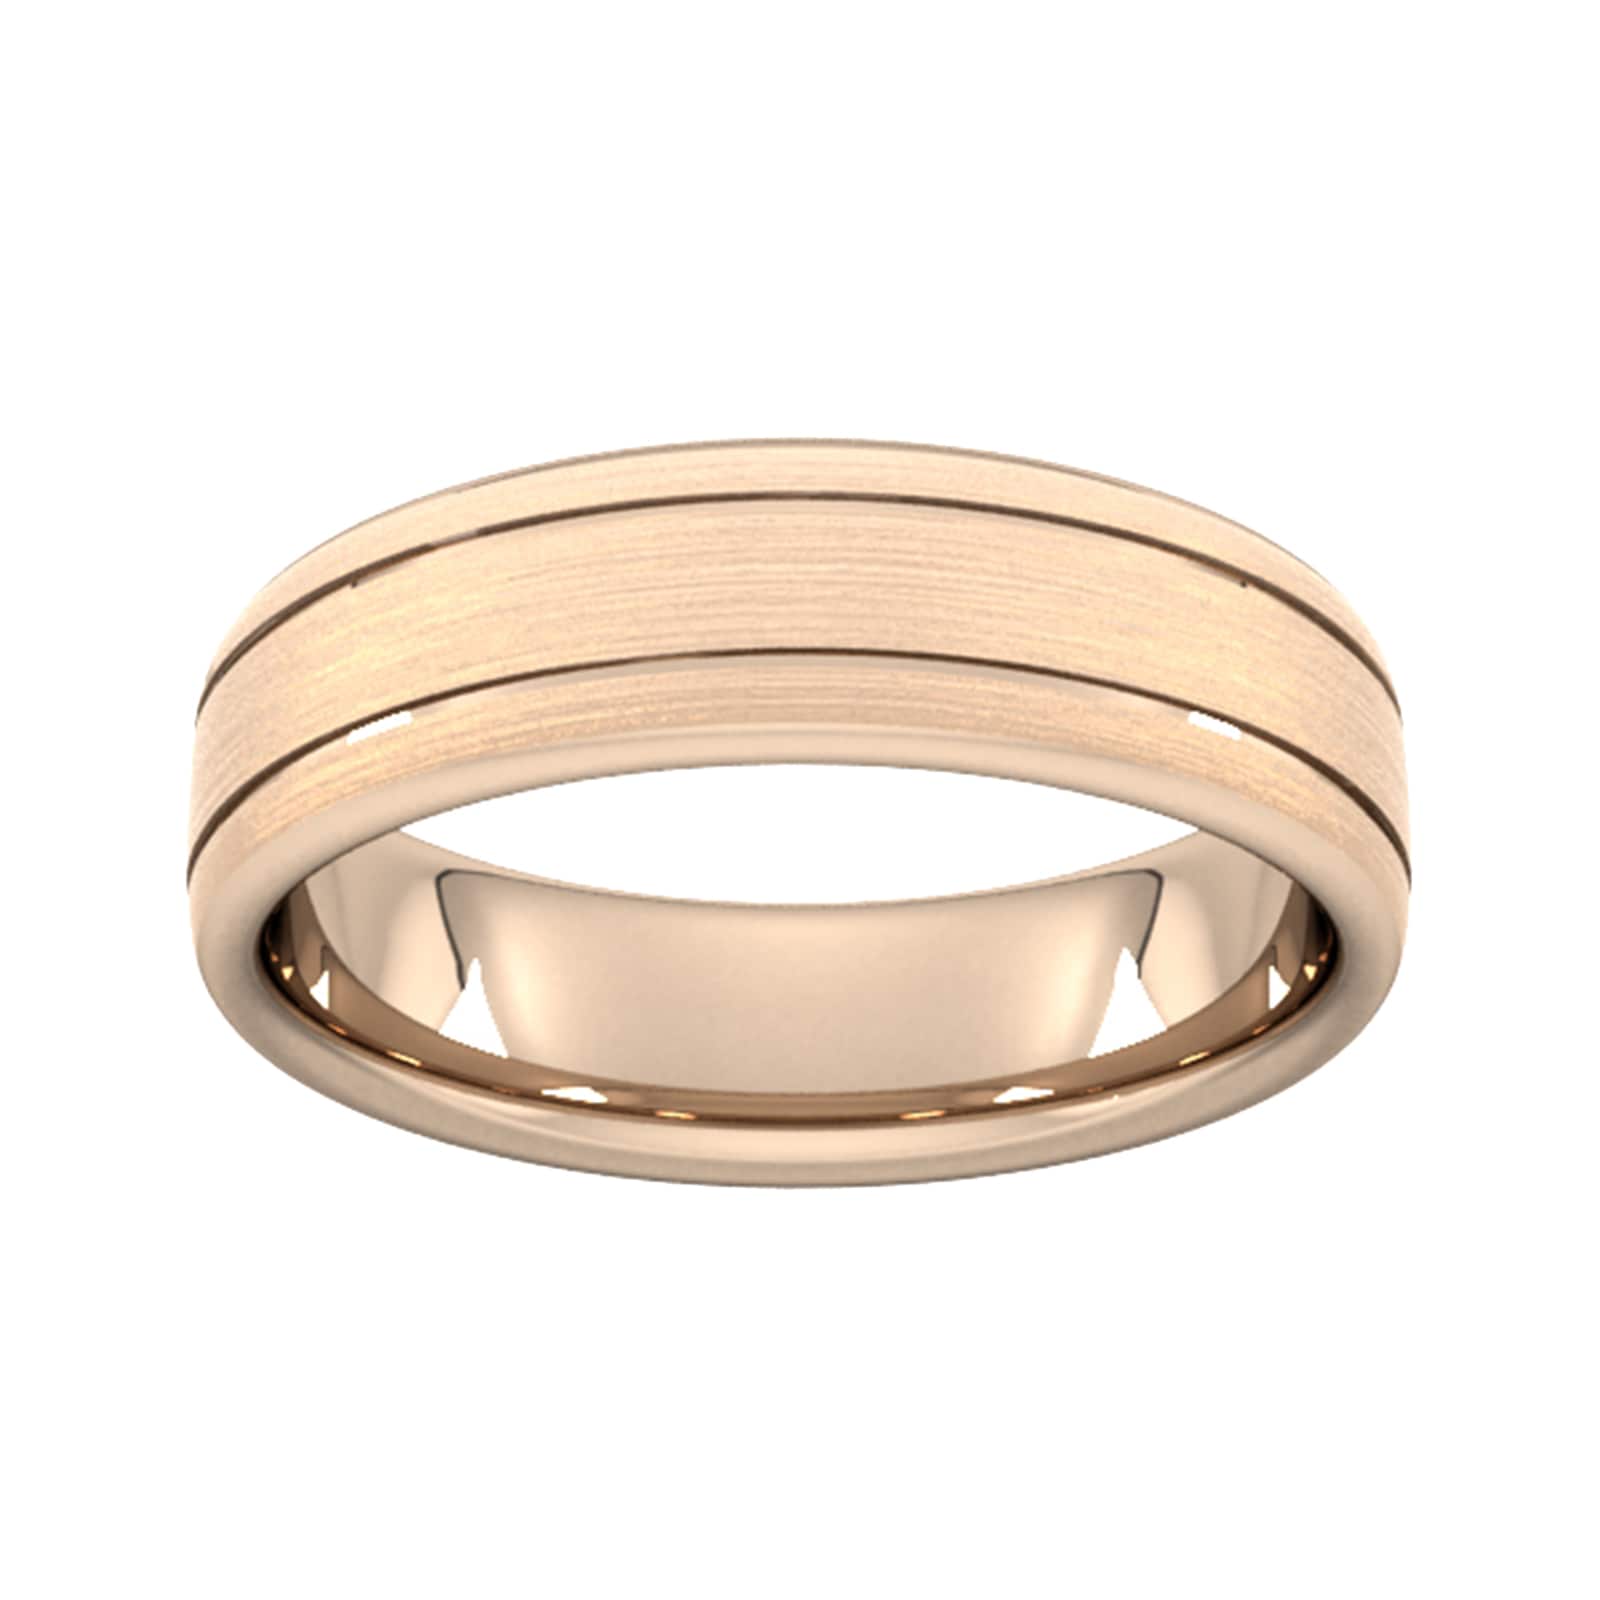 6mm Traditional Court Heavy Matt Finish With Double Grooves Wedding Ring In 18 Carat Rose Gold - Ring Size M